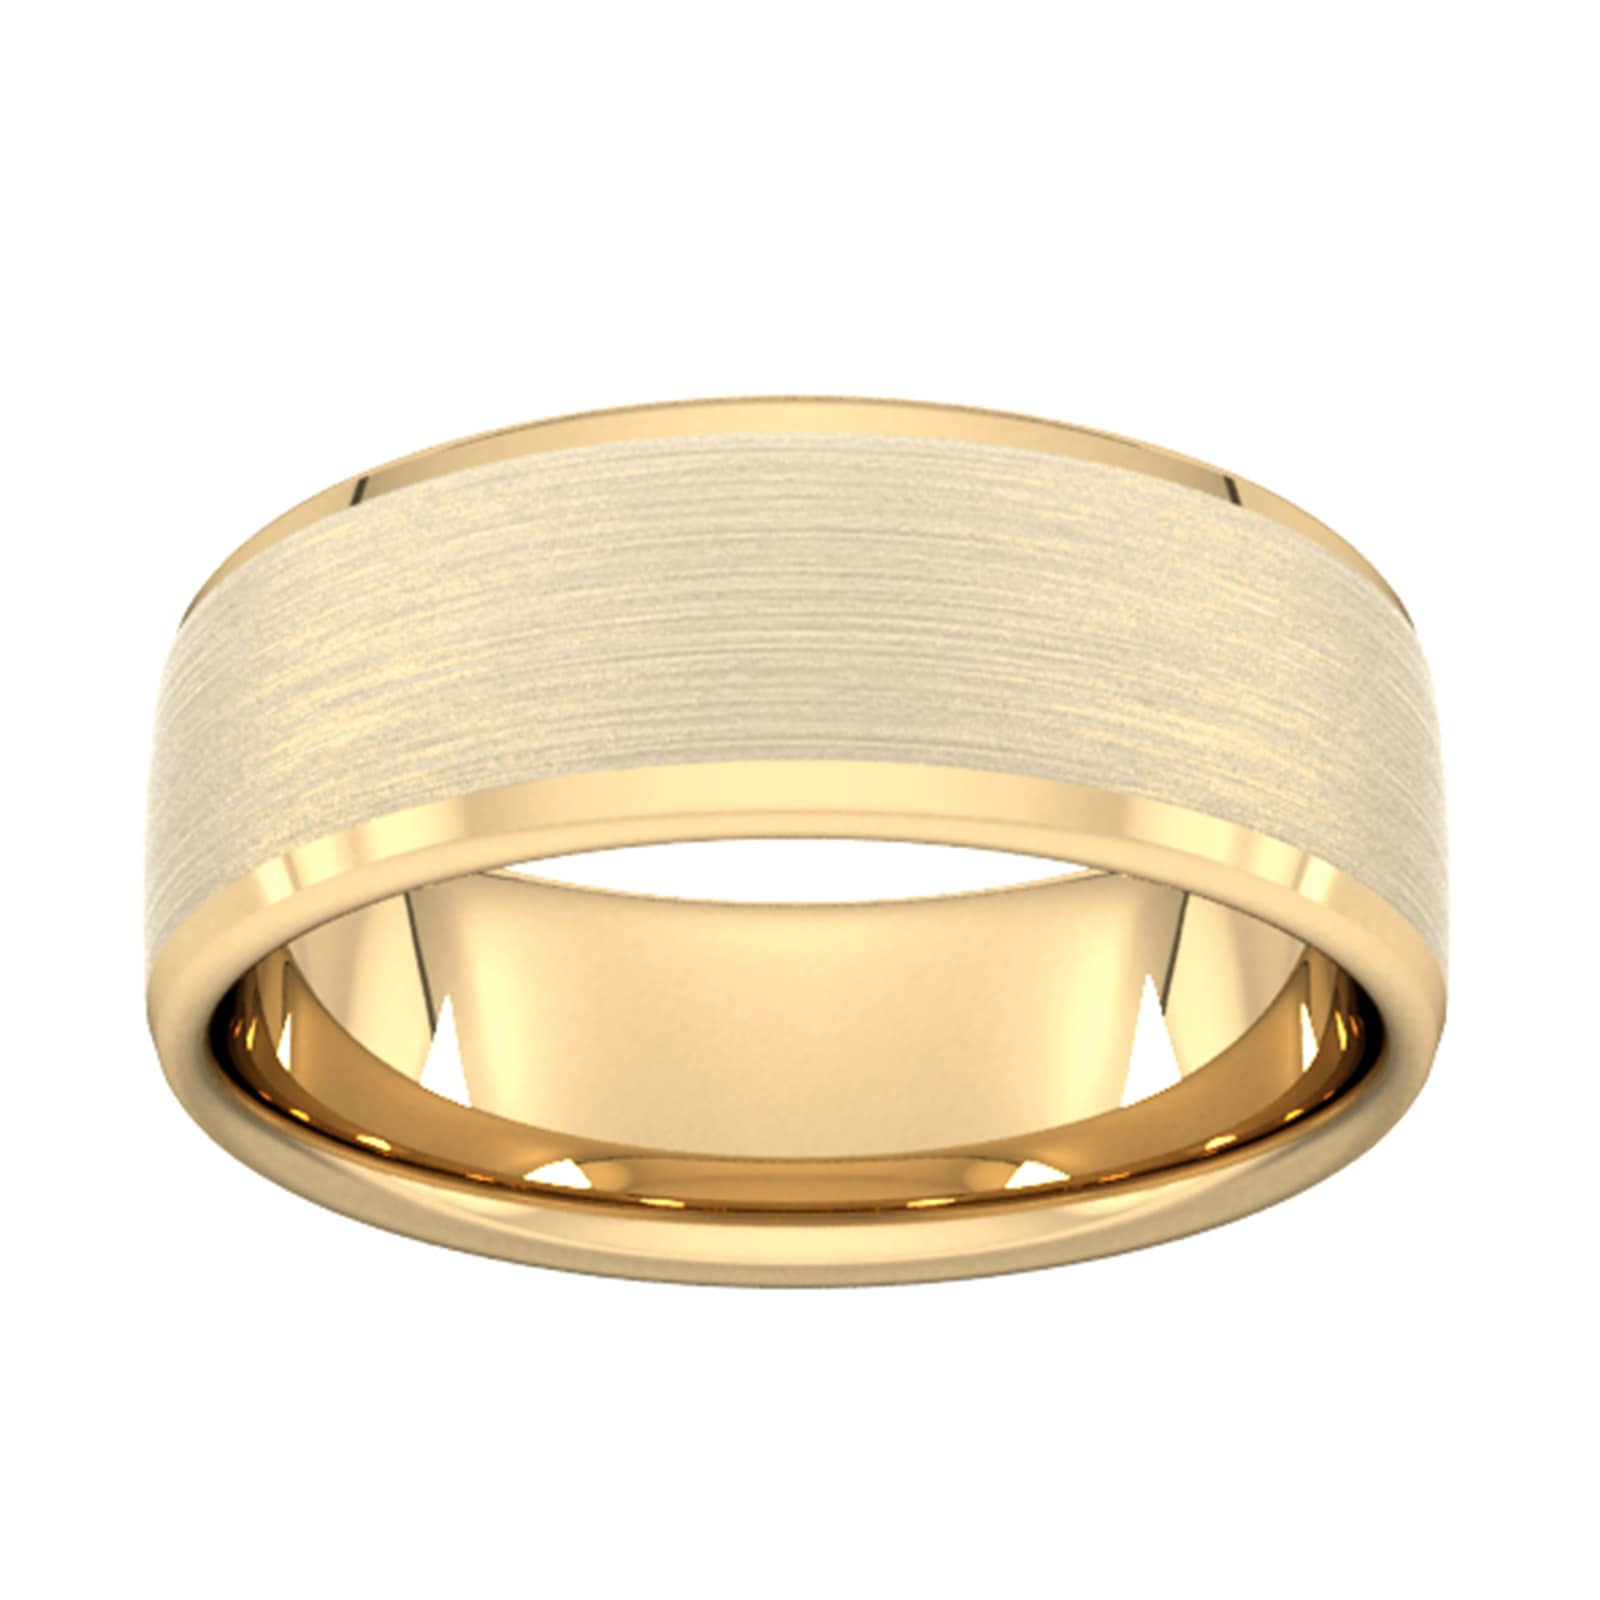 8mm Slight Court Extra Heavy Polished Chamfered Edges With Matt Centre Wedding Ring In 9 Carat Yellow Gold - Ring Size S